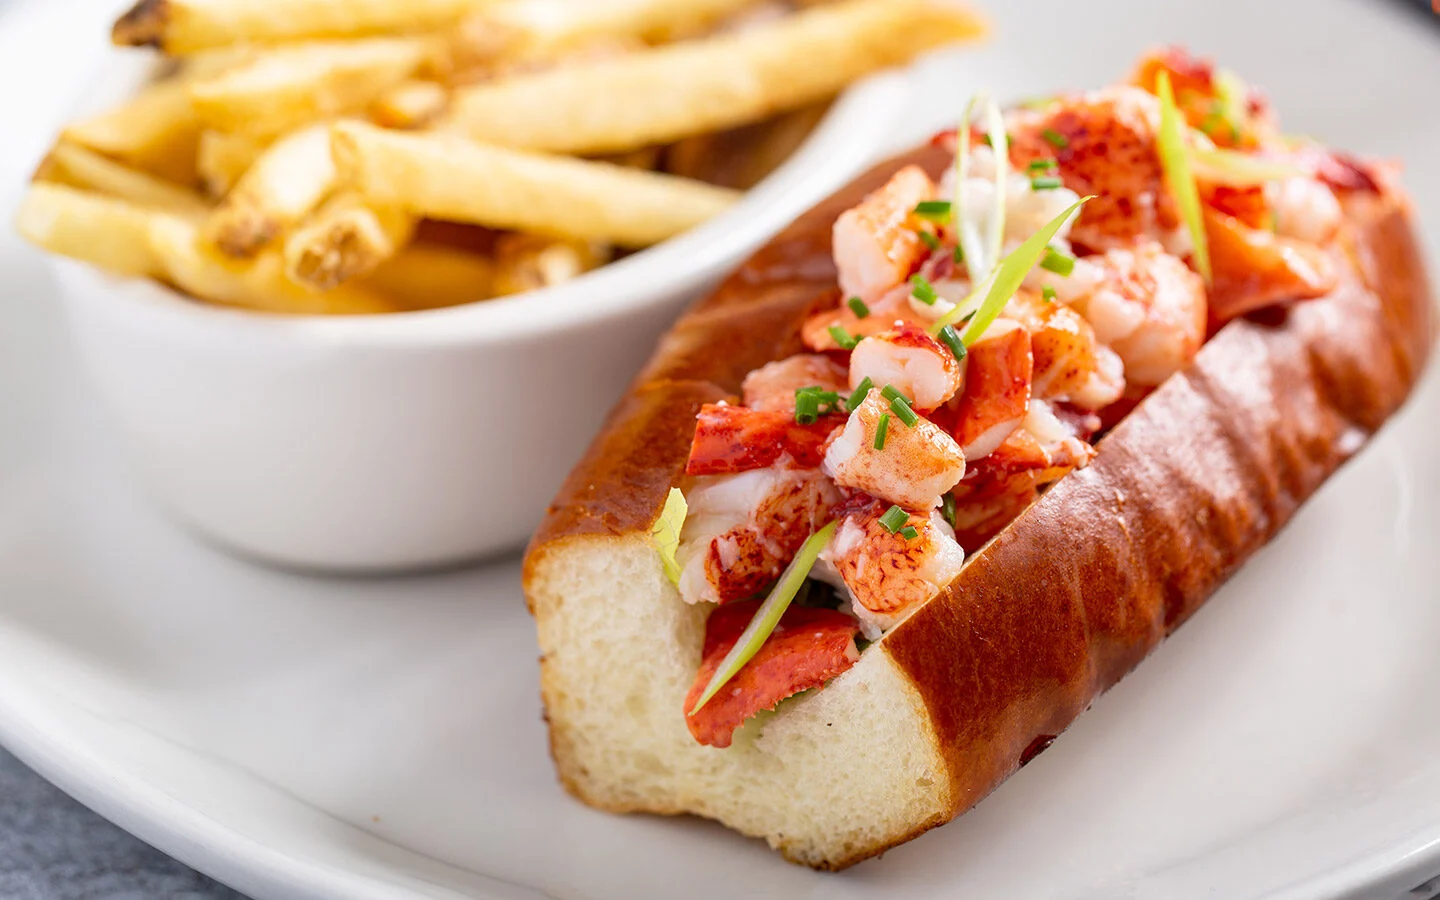 Lobster roll from Dave's Lobster in Charlottetown, Prince Edward Island, Canada